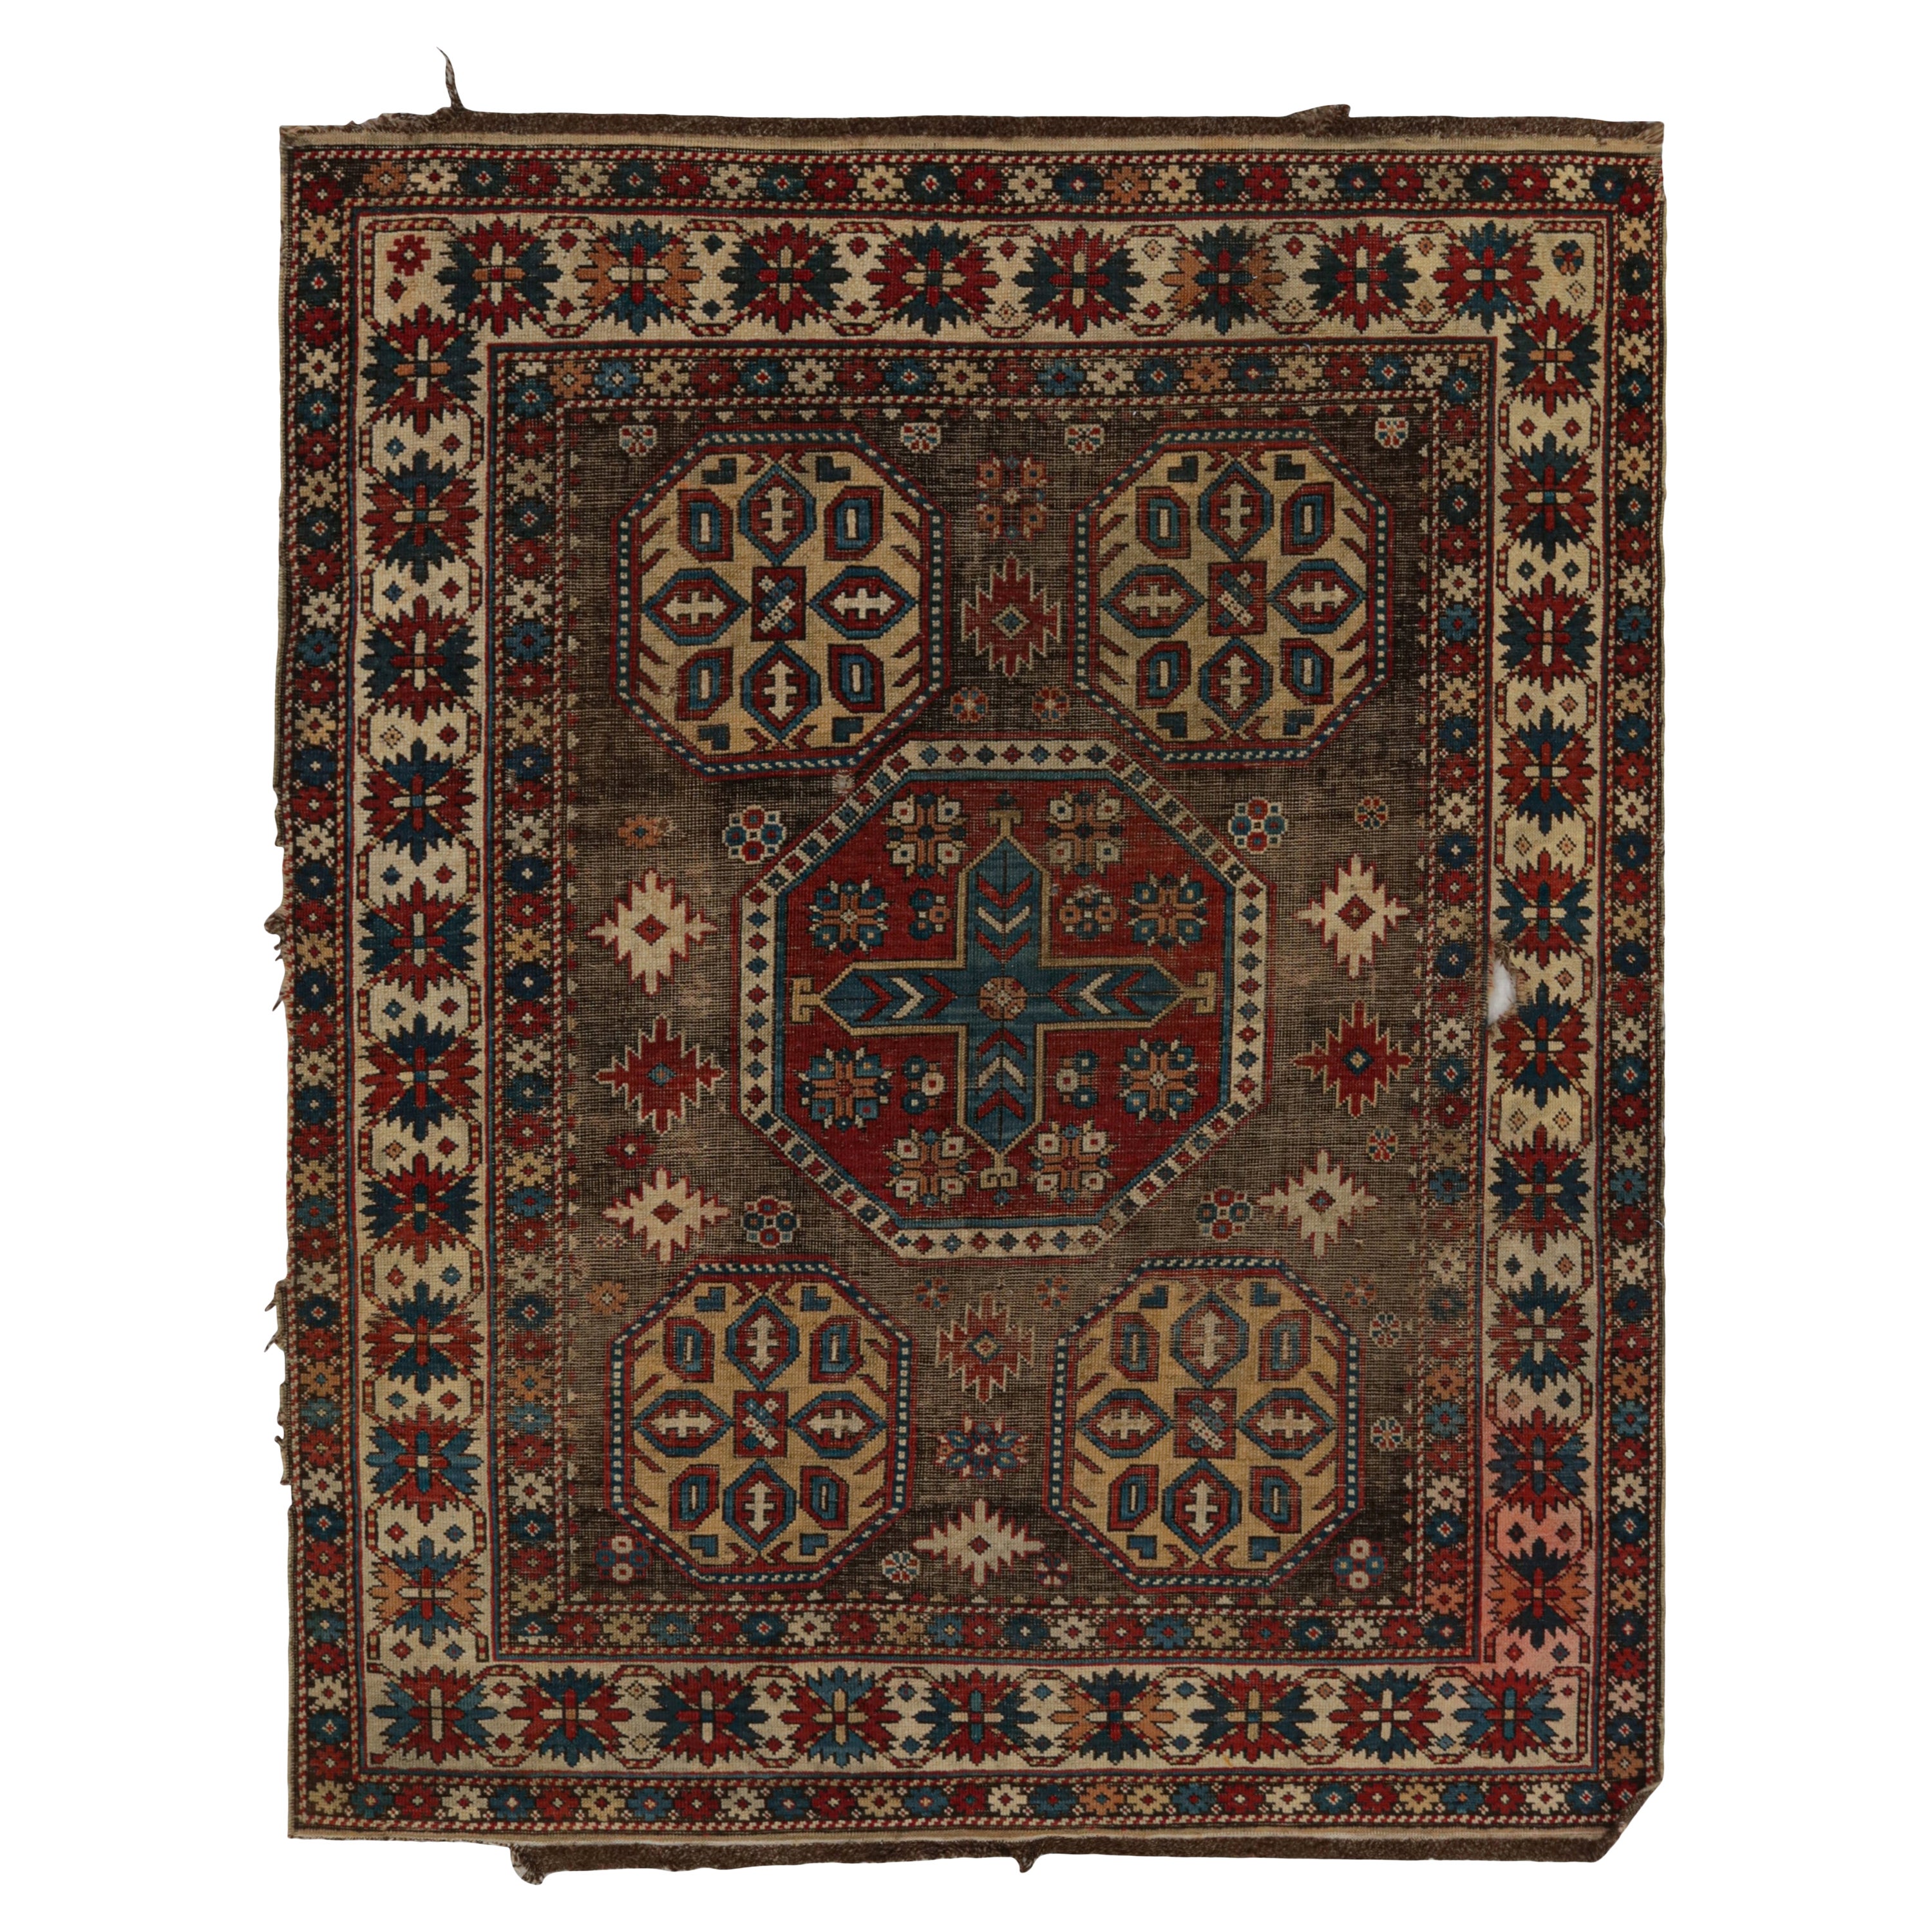 Antique tribal Kazak rug in Brown with Geometric Patterns, from Rug & Kilim For Sale